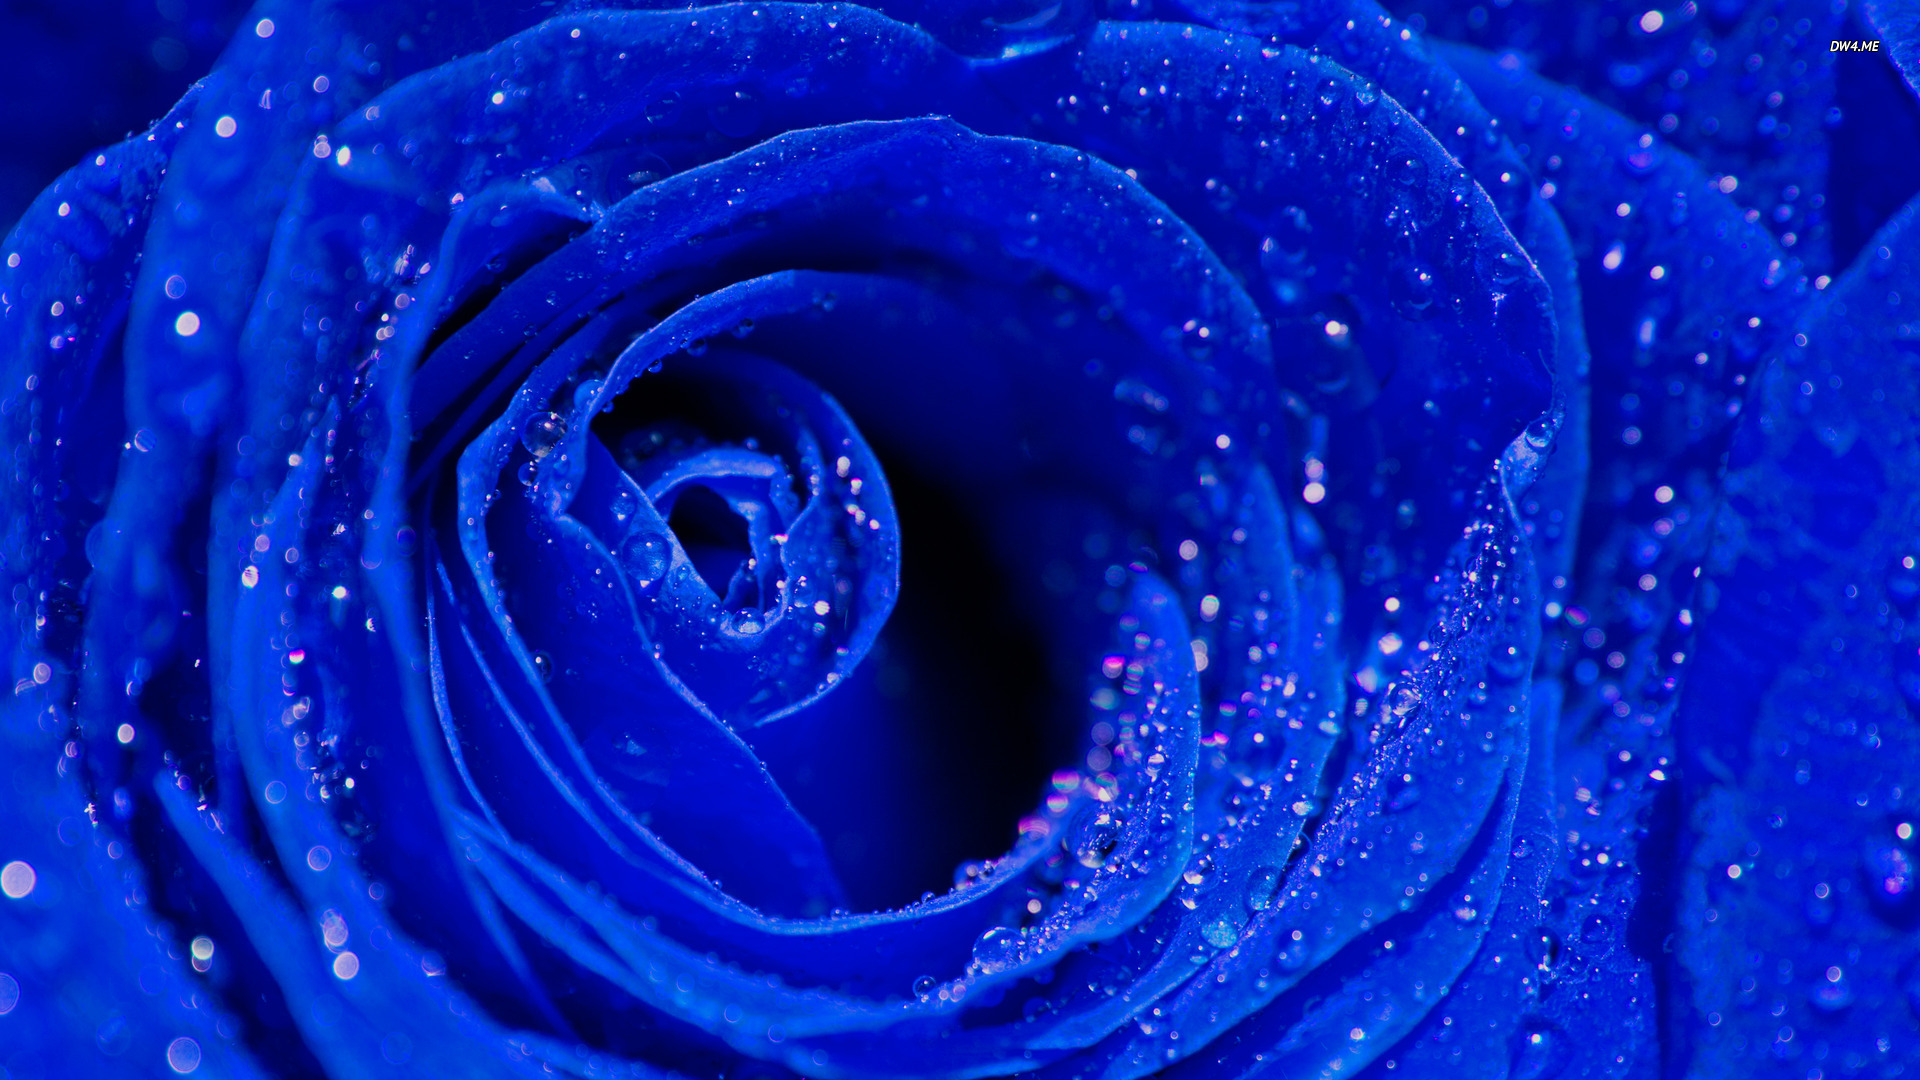 Blue Roses Background Wallpaper High Definition Quality